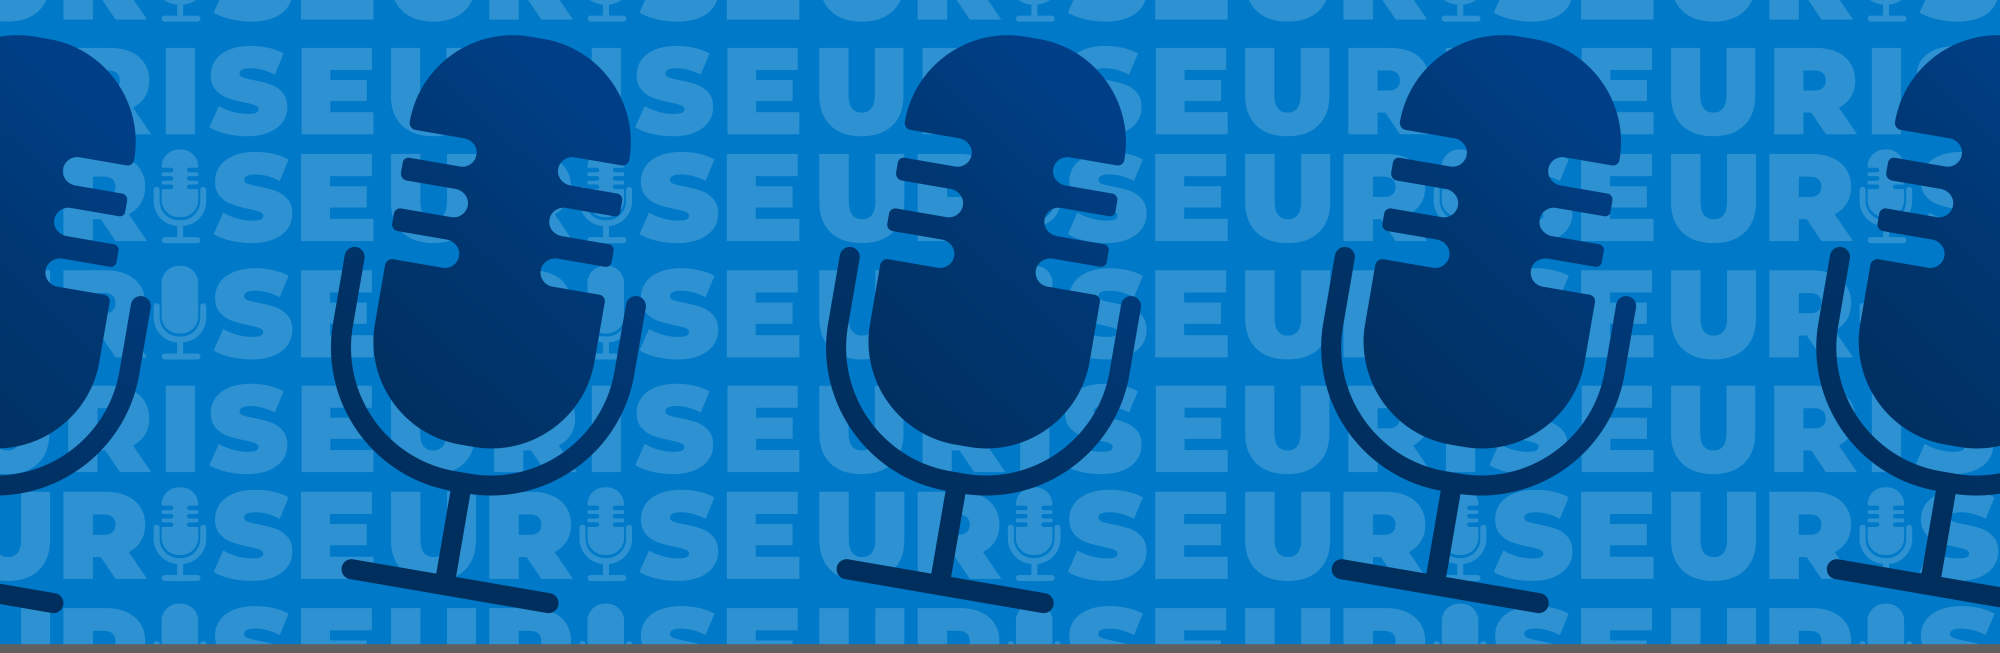 URISE podcast logo (microphone graphic)